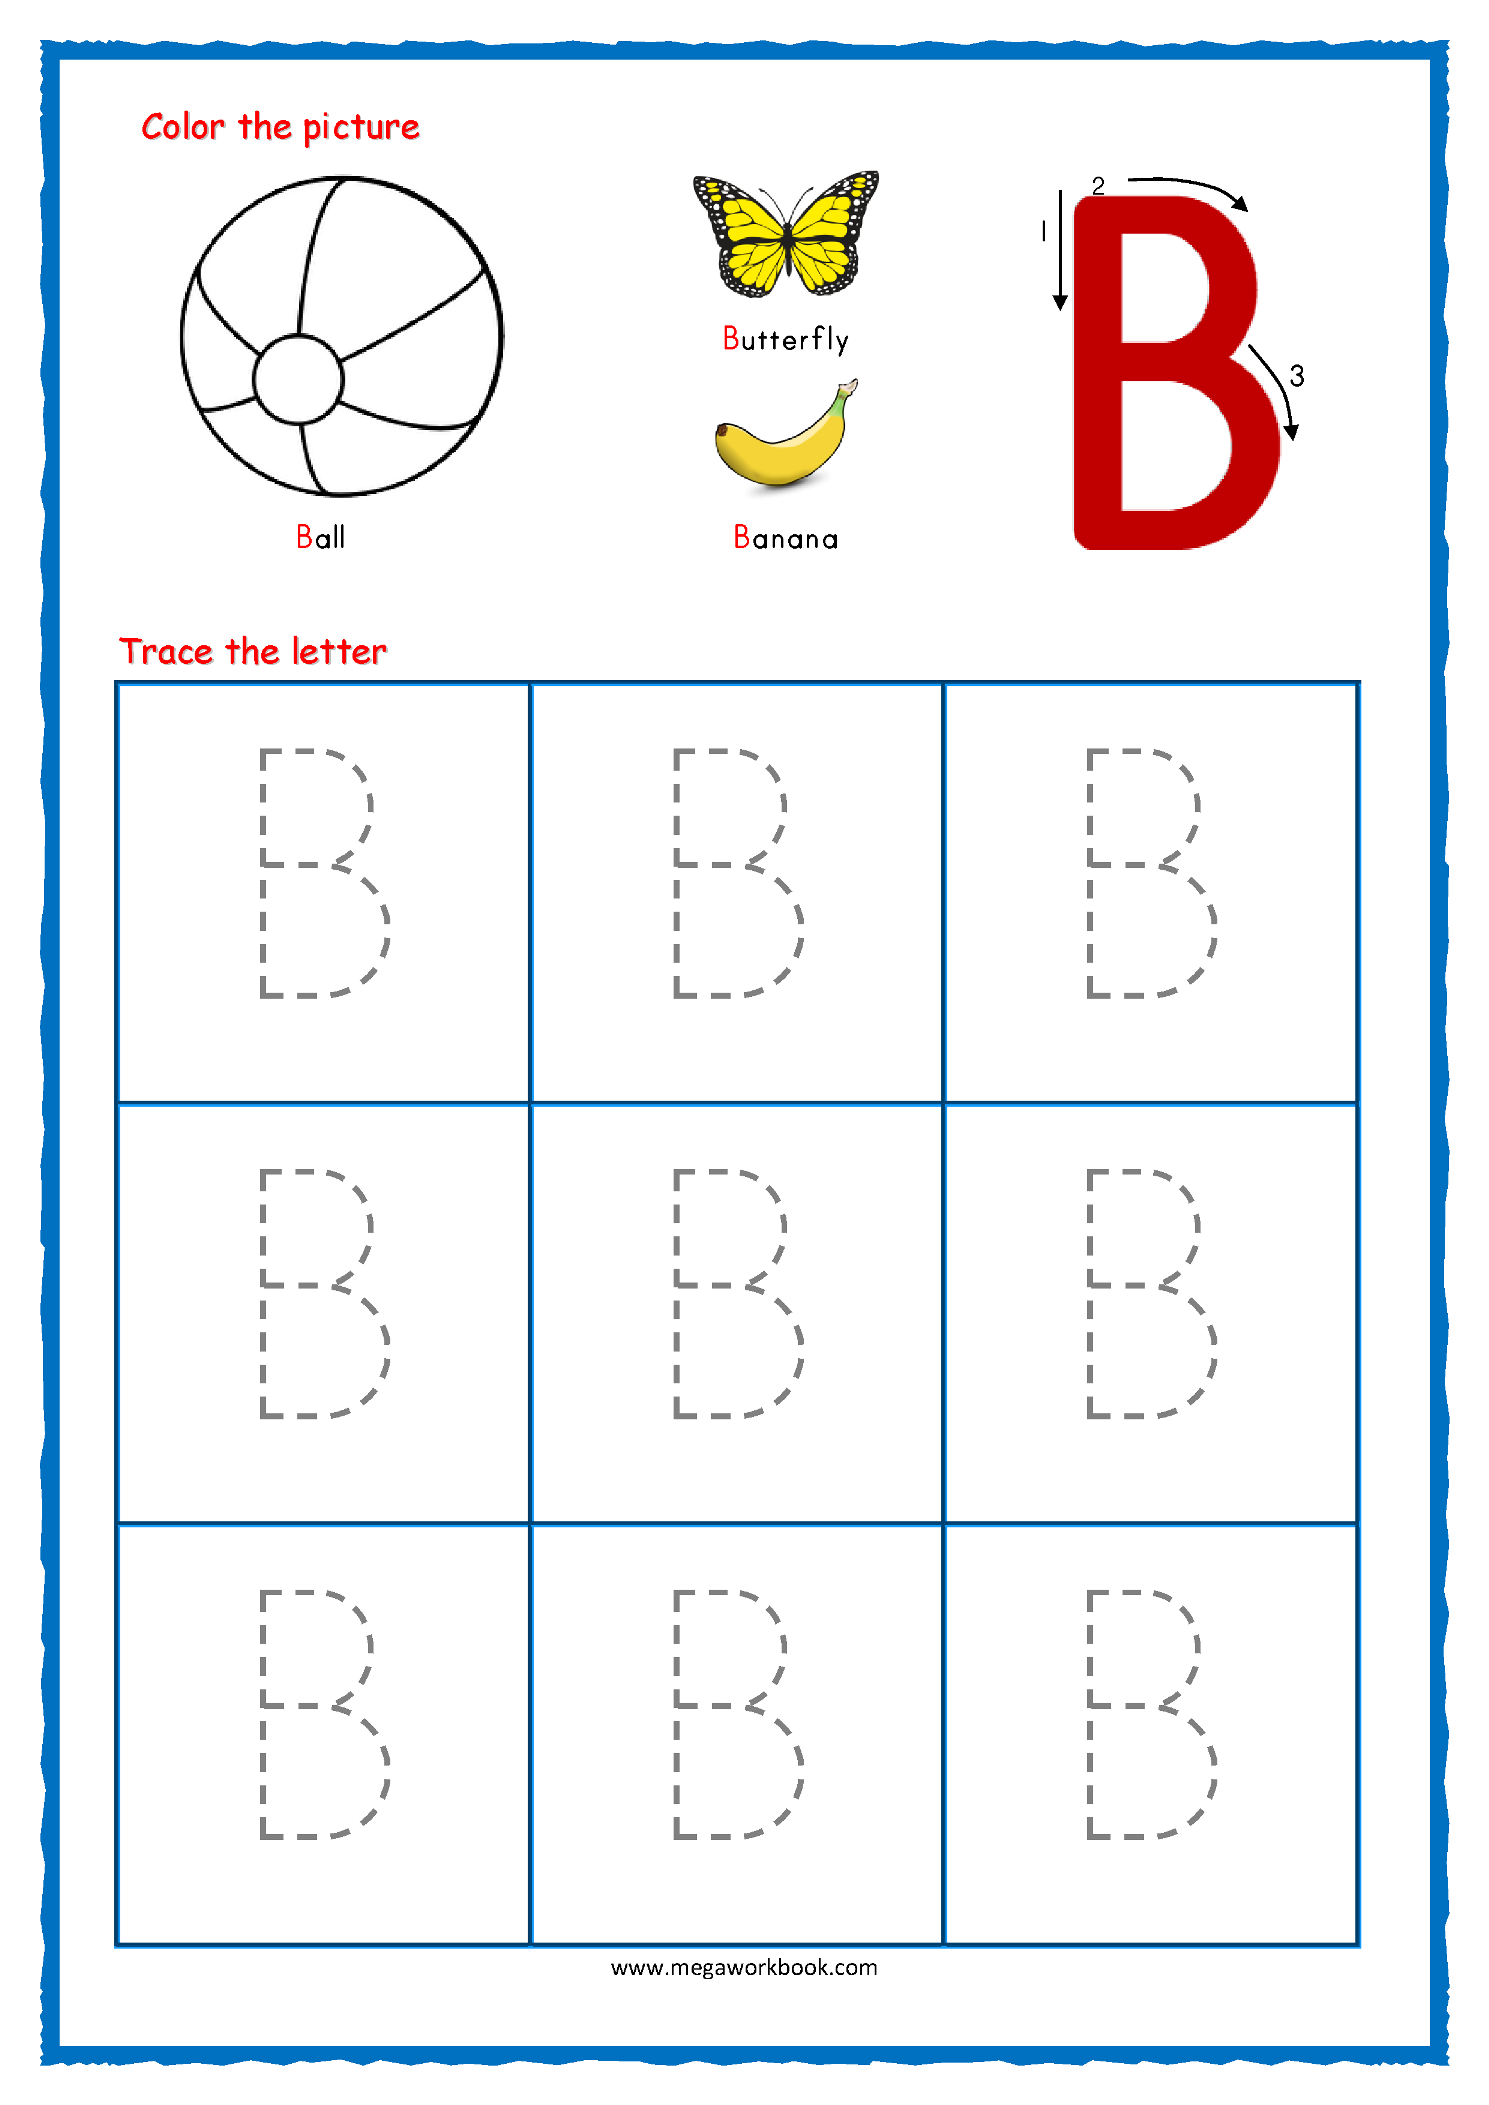 tracing letters alphabet tracing capital letters letter tracing worksheets free printables megaworkbook